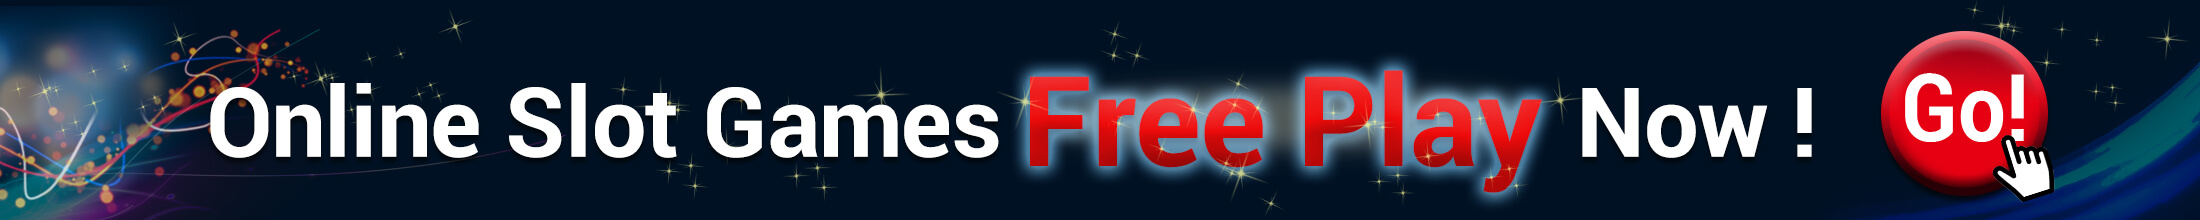 online-slot-games-free-play-now